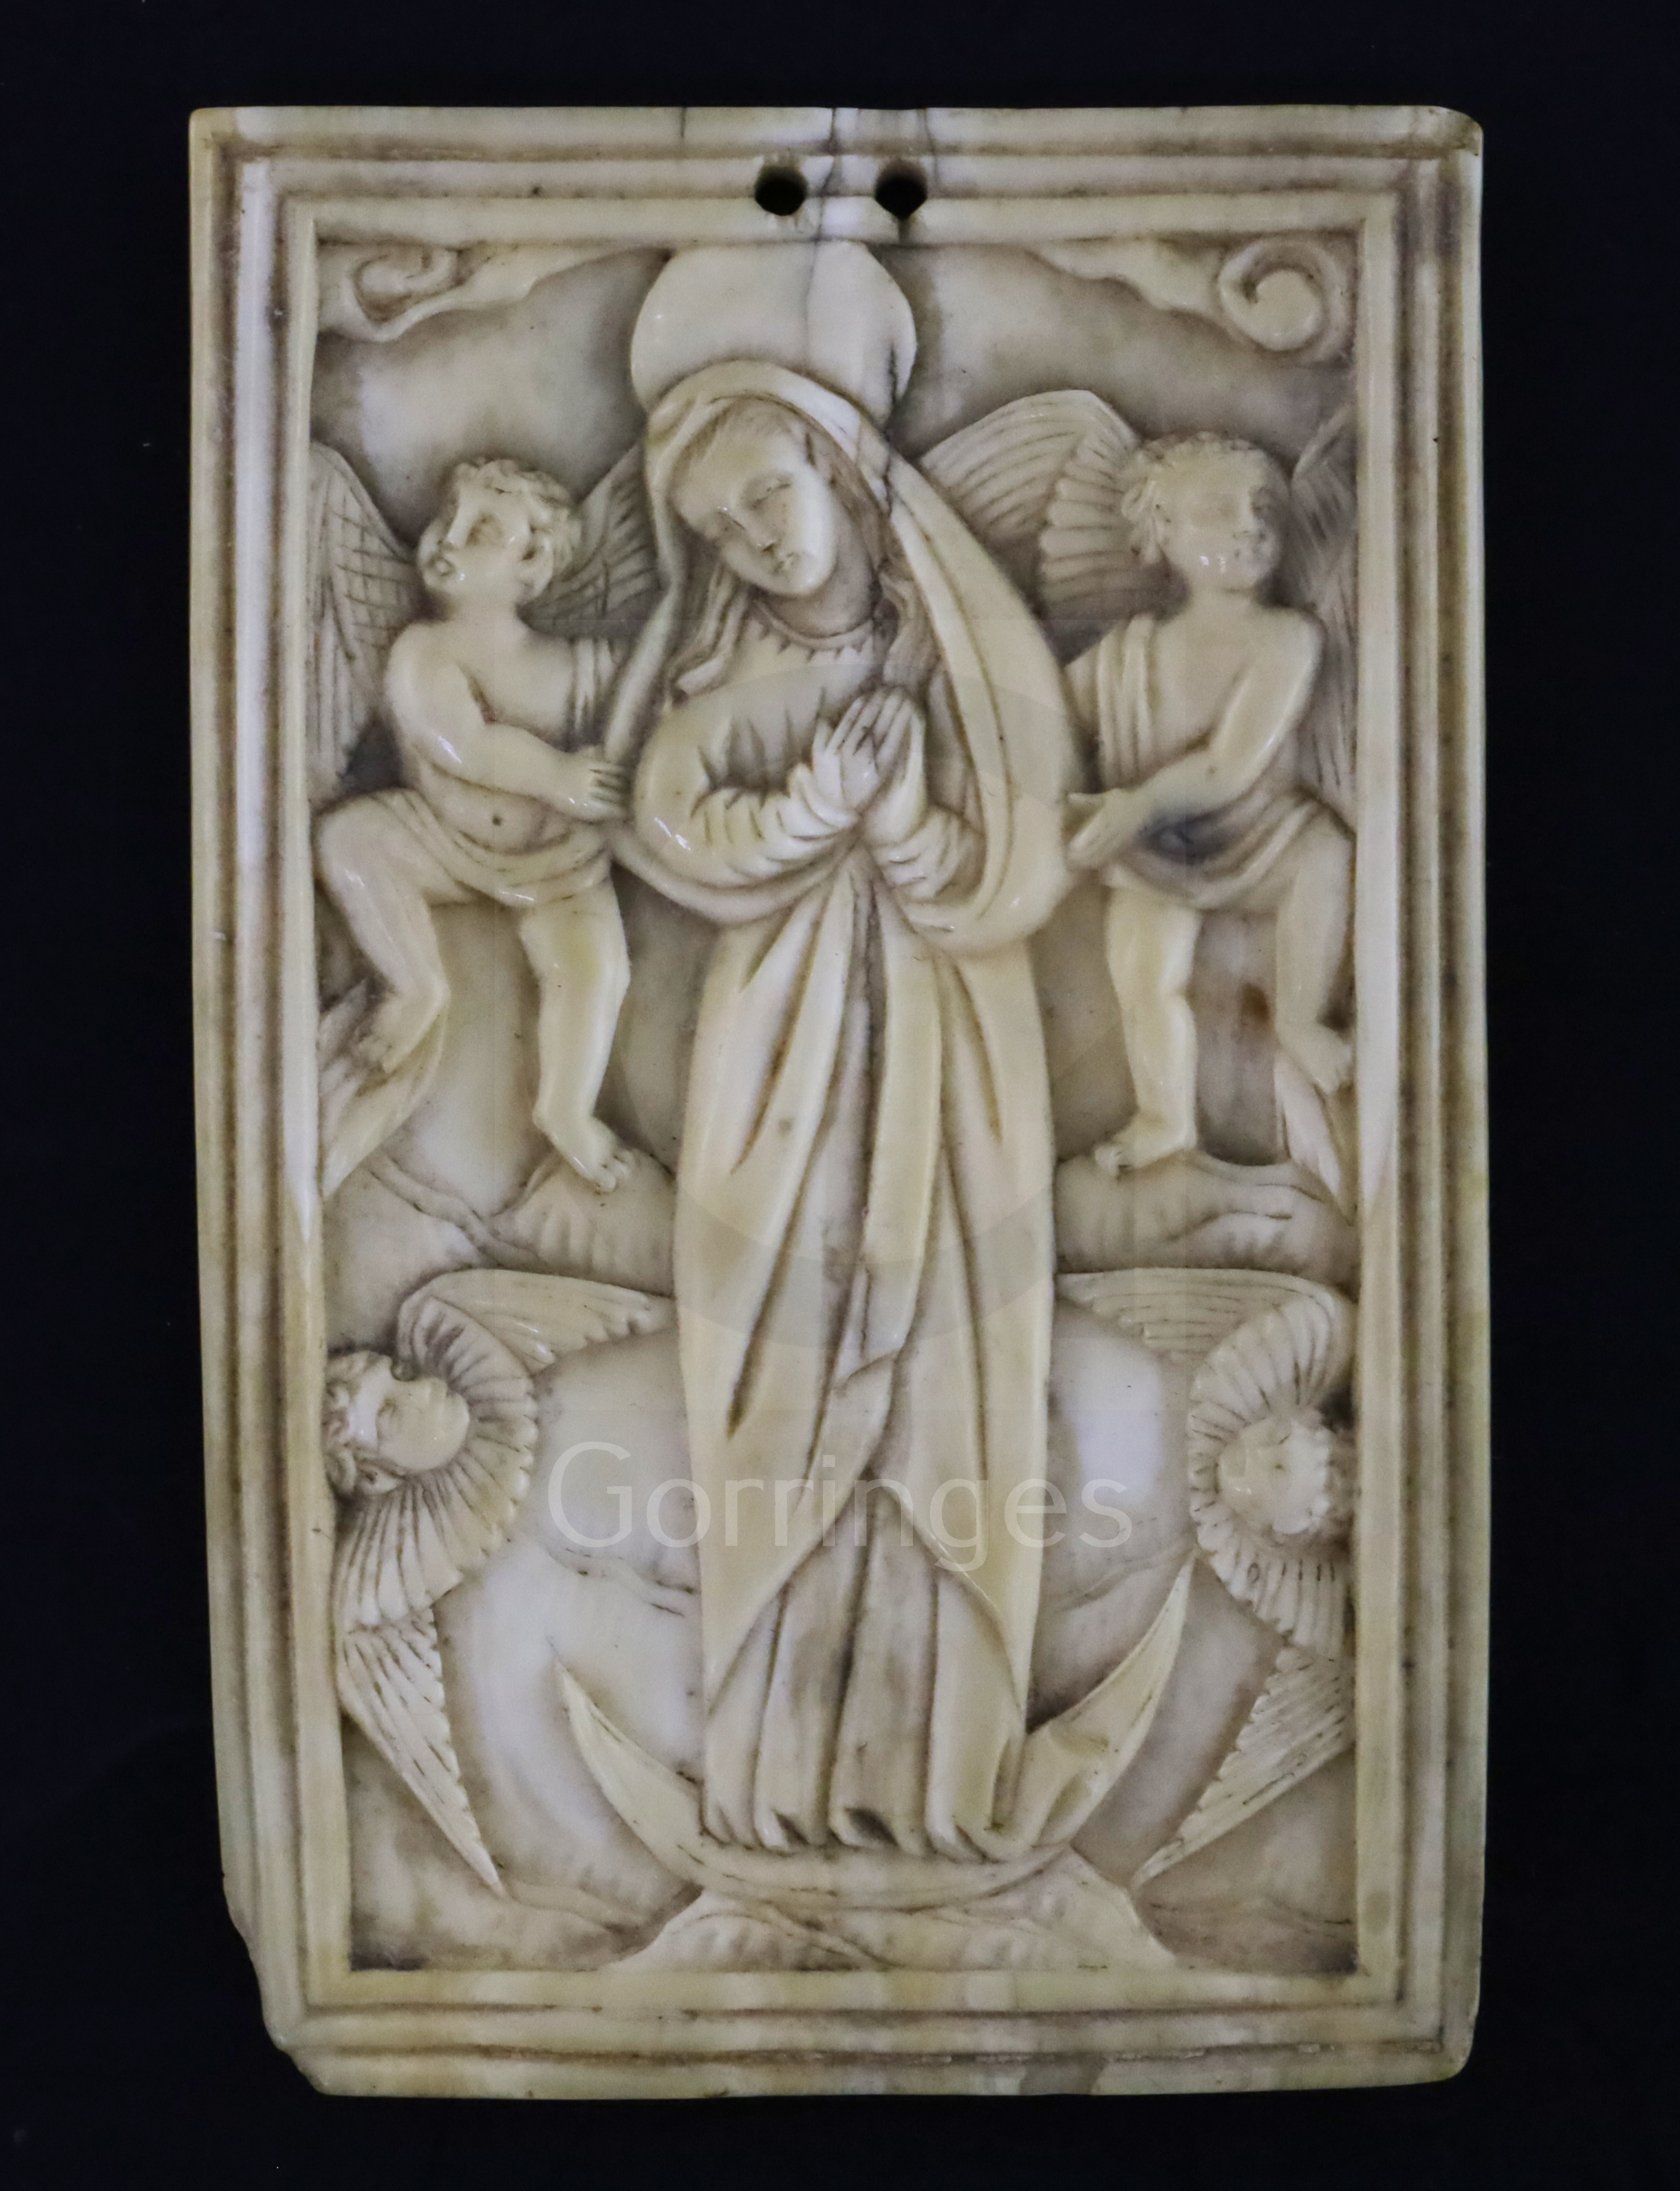 A late 17th / early 18th century Chinese 'Jesuit' relief-carved ivory plaque, The Apotheosis of